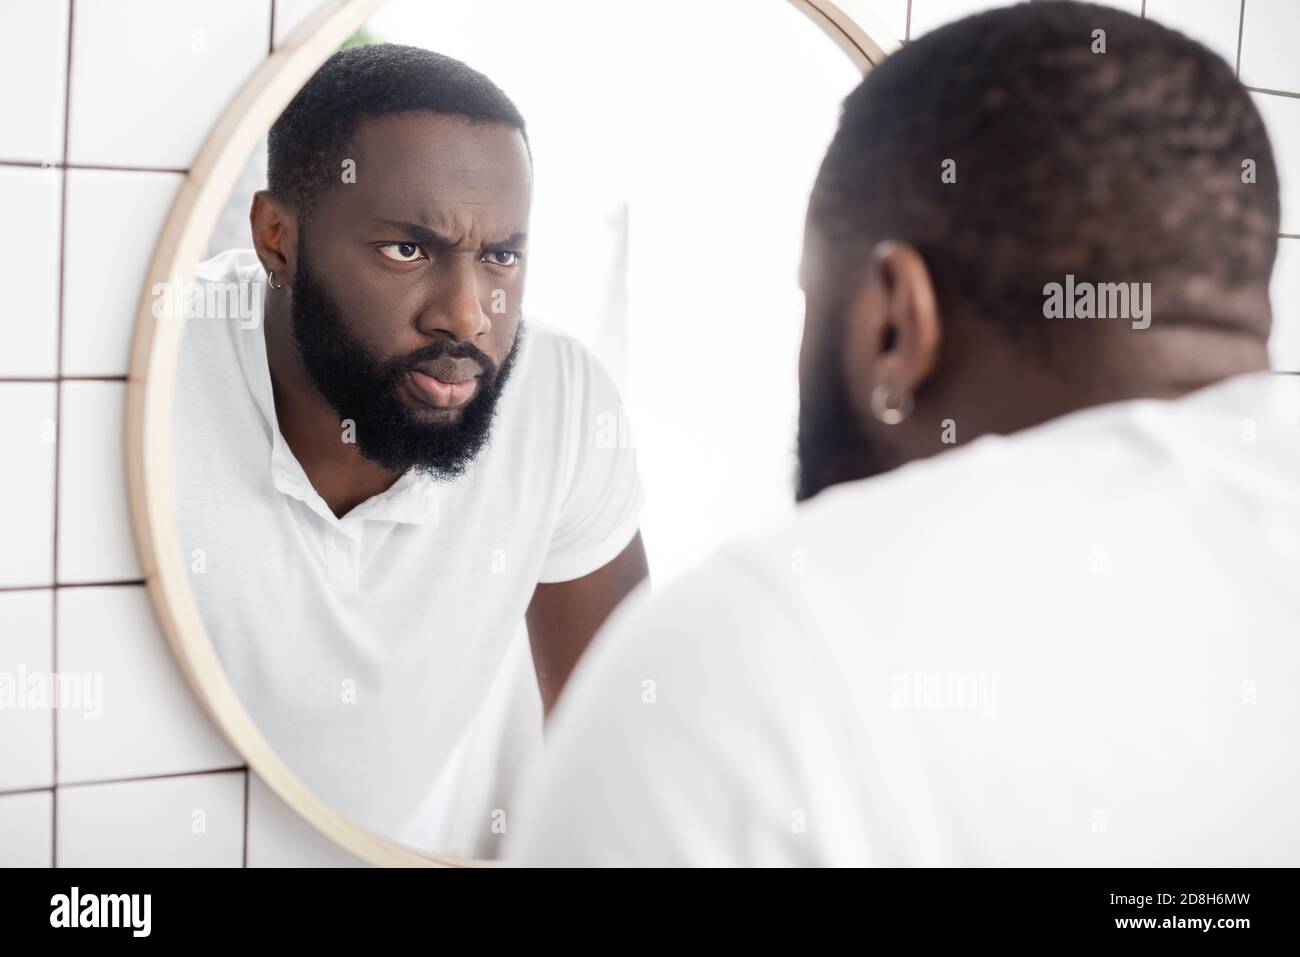 https://c8.alamy.com/comp/2D8H6MW/serious-afro-american-man-looking-at-reflection-in-mirror-2D8H6MW.jpg